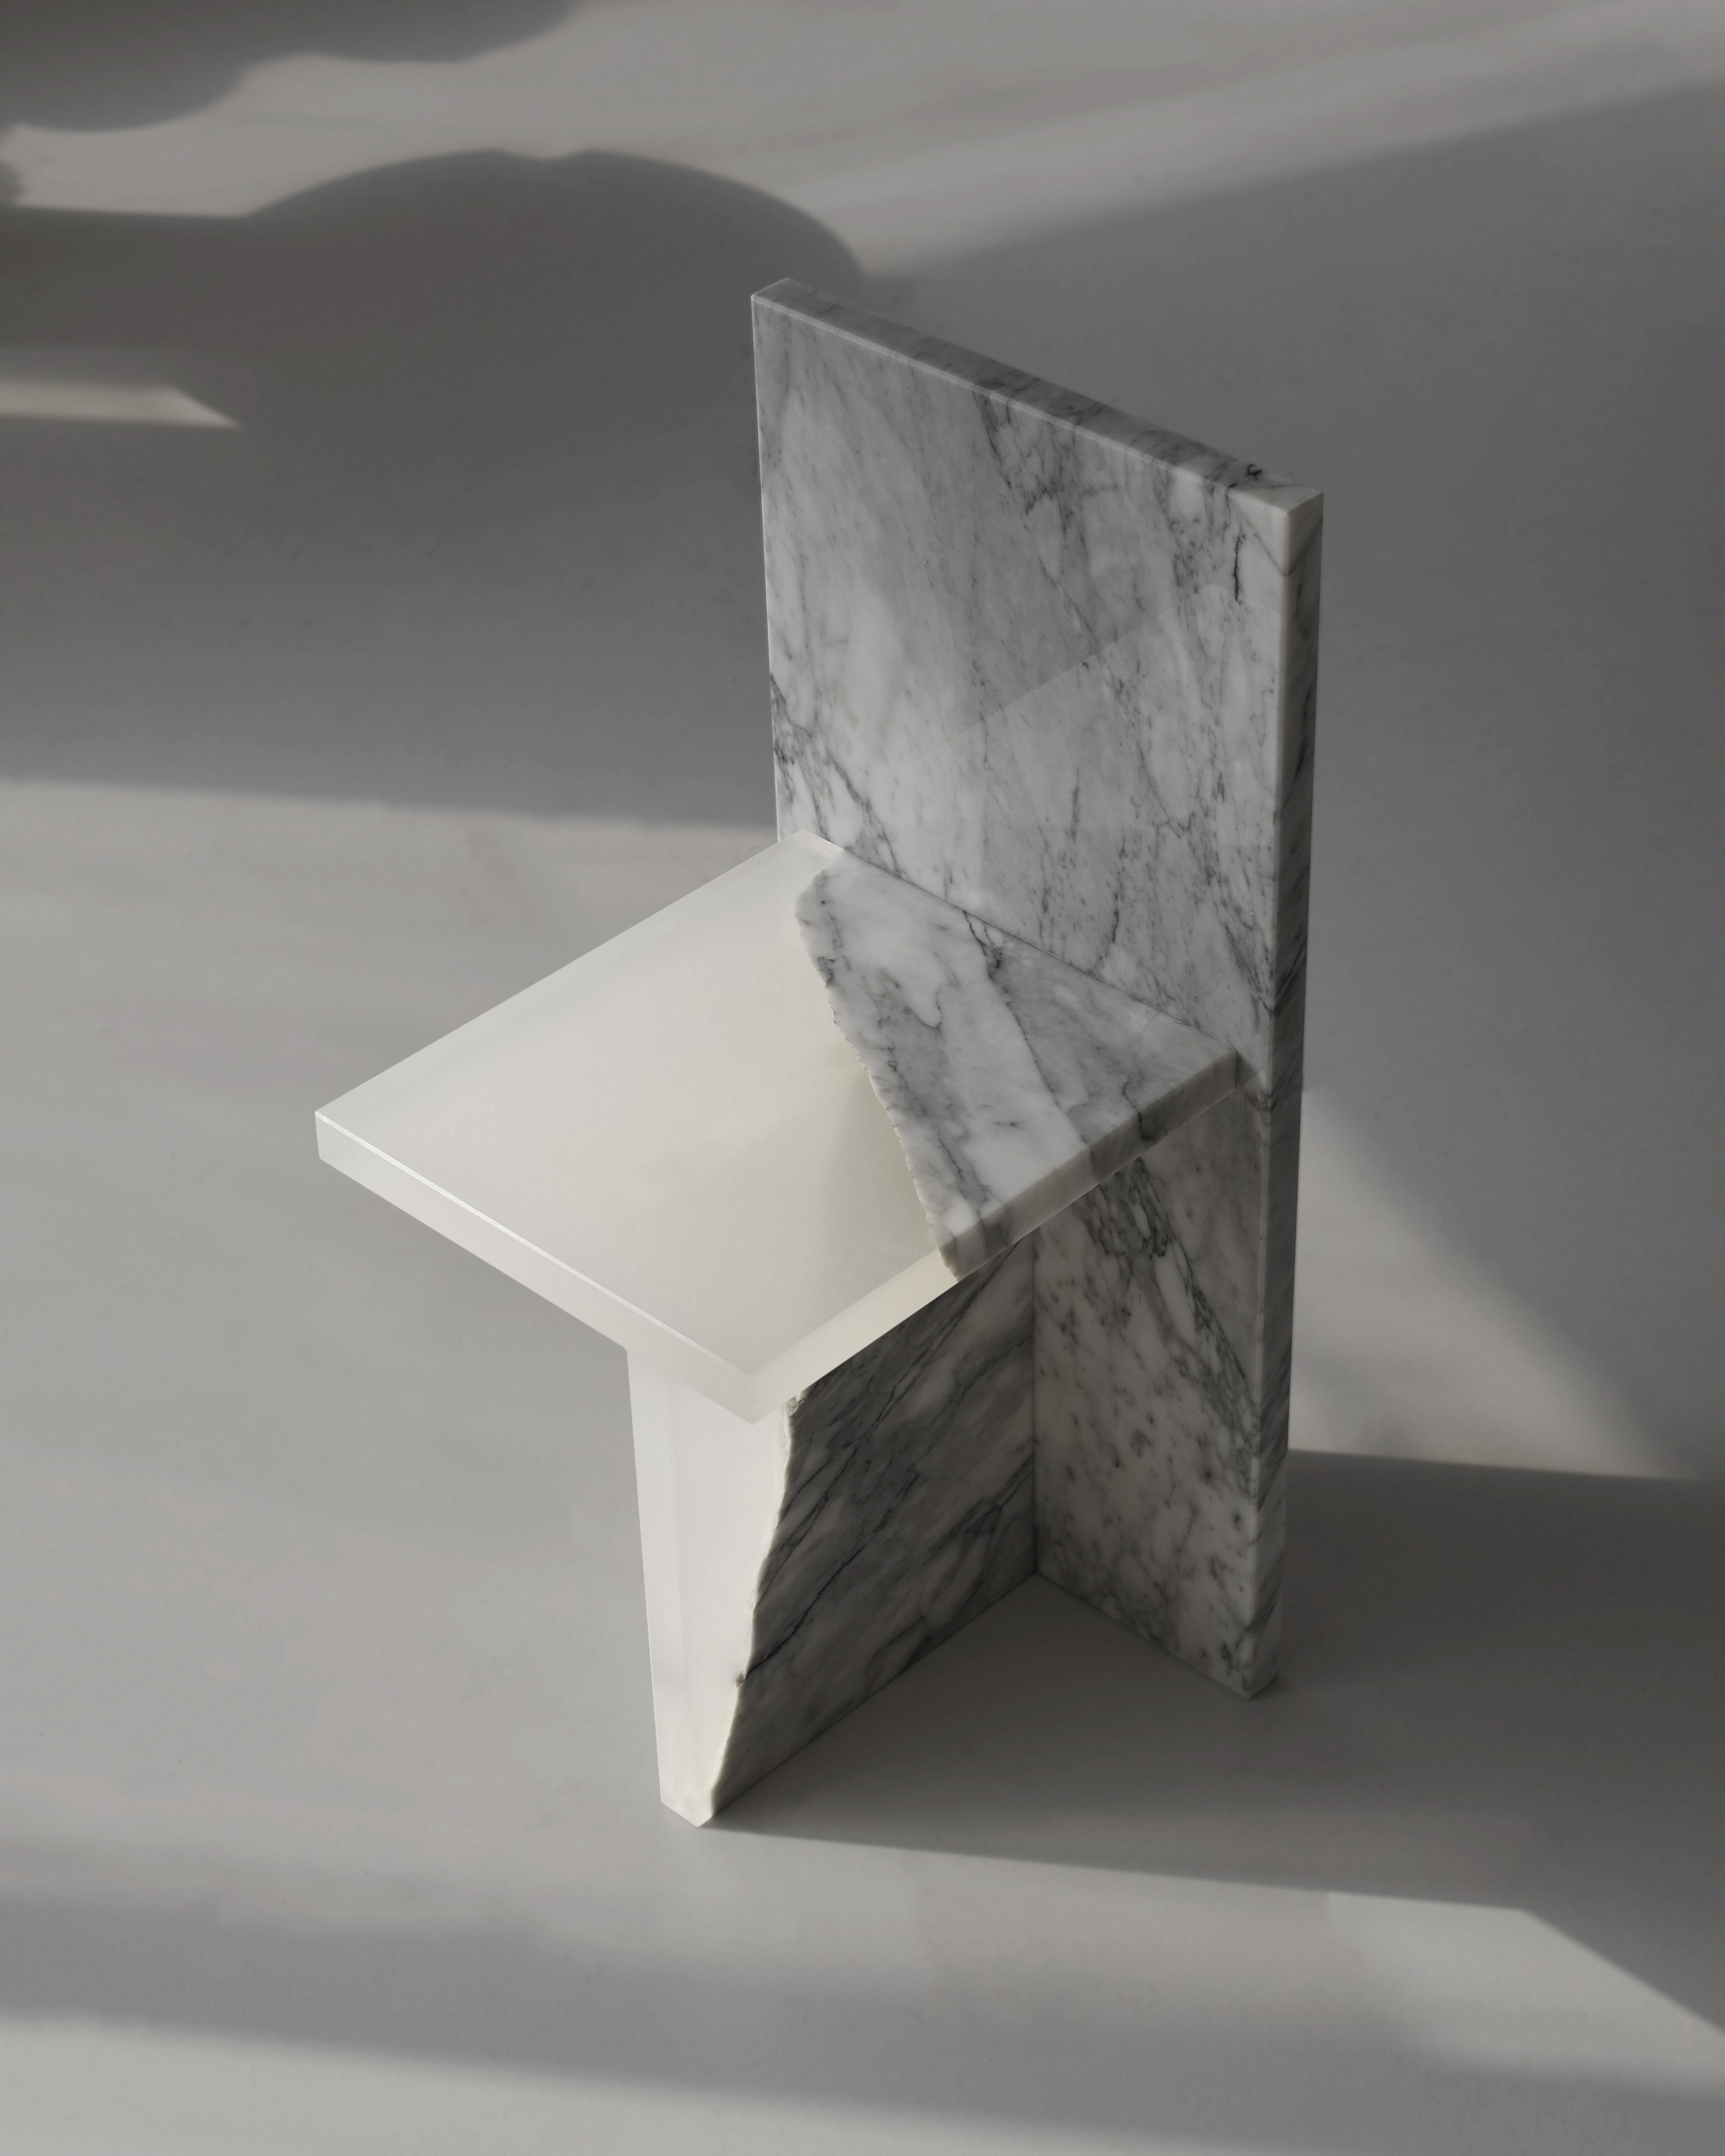 White crystal resin and marble, fragment chair, Jang Hea Kyoung
Artist: Jang Hea Kyoung
Materials: Crystal resin and marble
Dimensions: 33 x 34 x 74 cm

Jang Hea Kyoung is based in Seoul, Republic of Korea. She searches for craft elements and